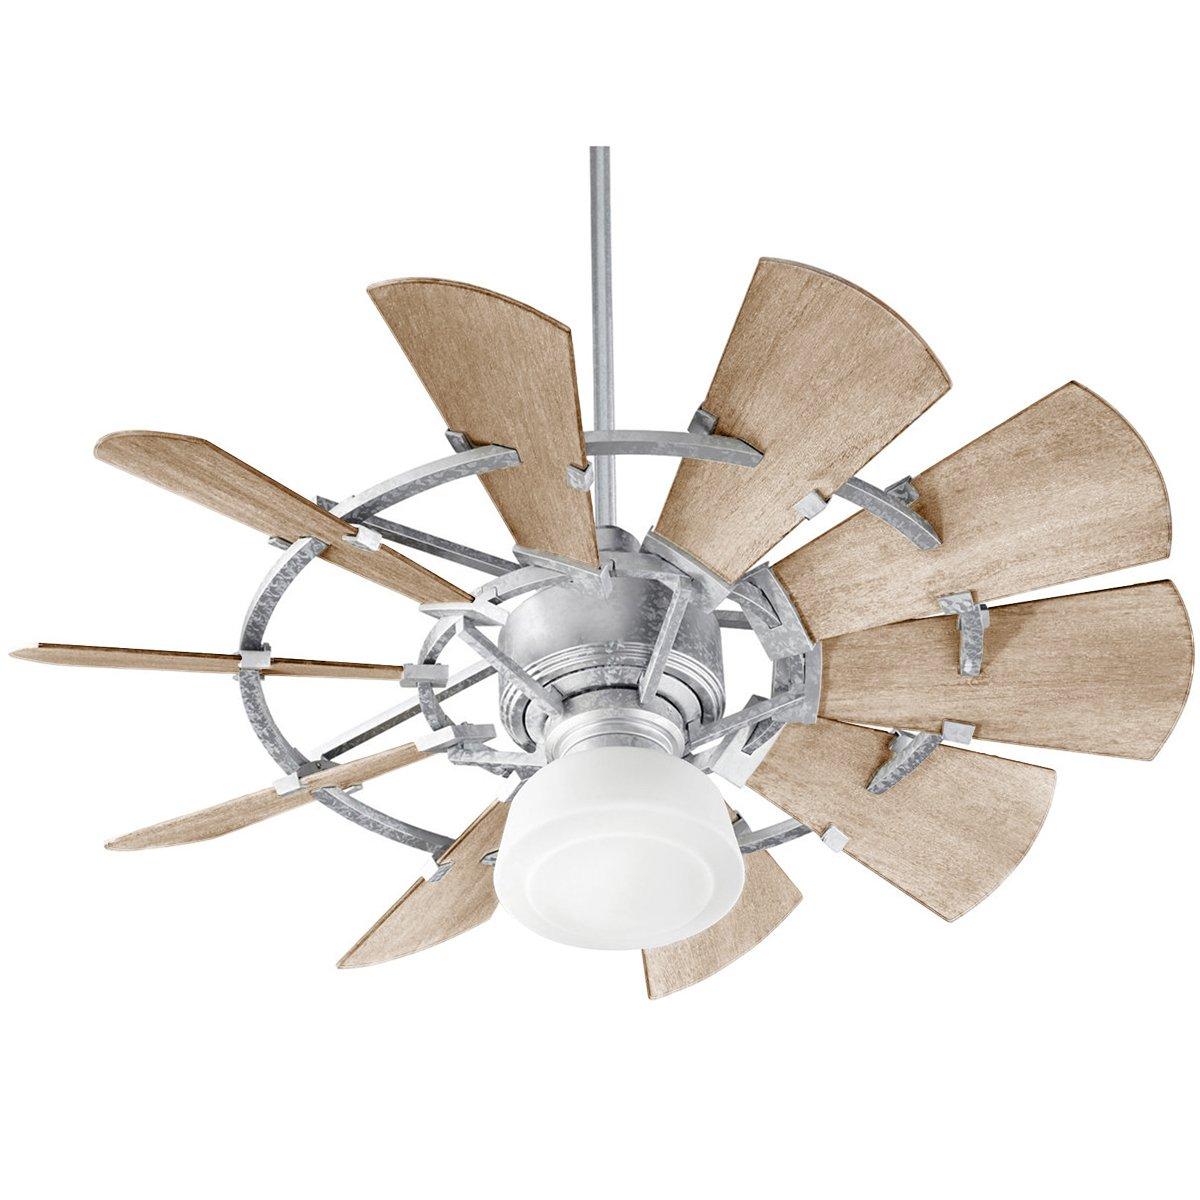 Sunflower windmill. We made this out of ceiling fan blades, the